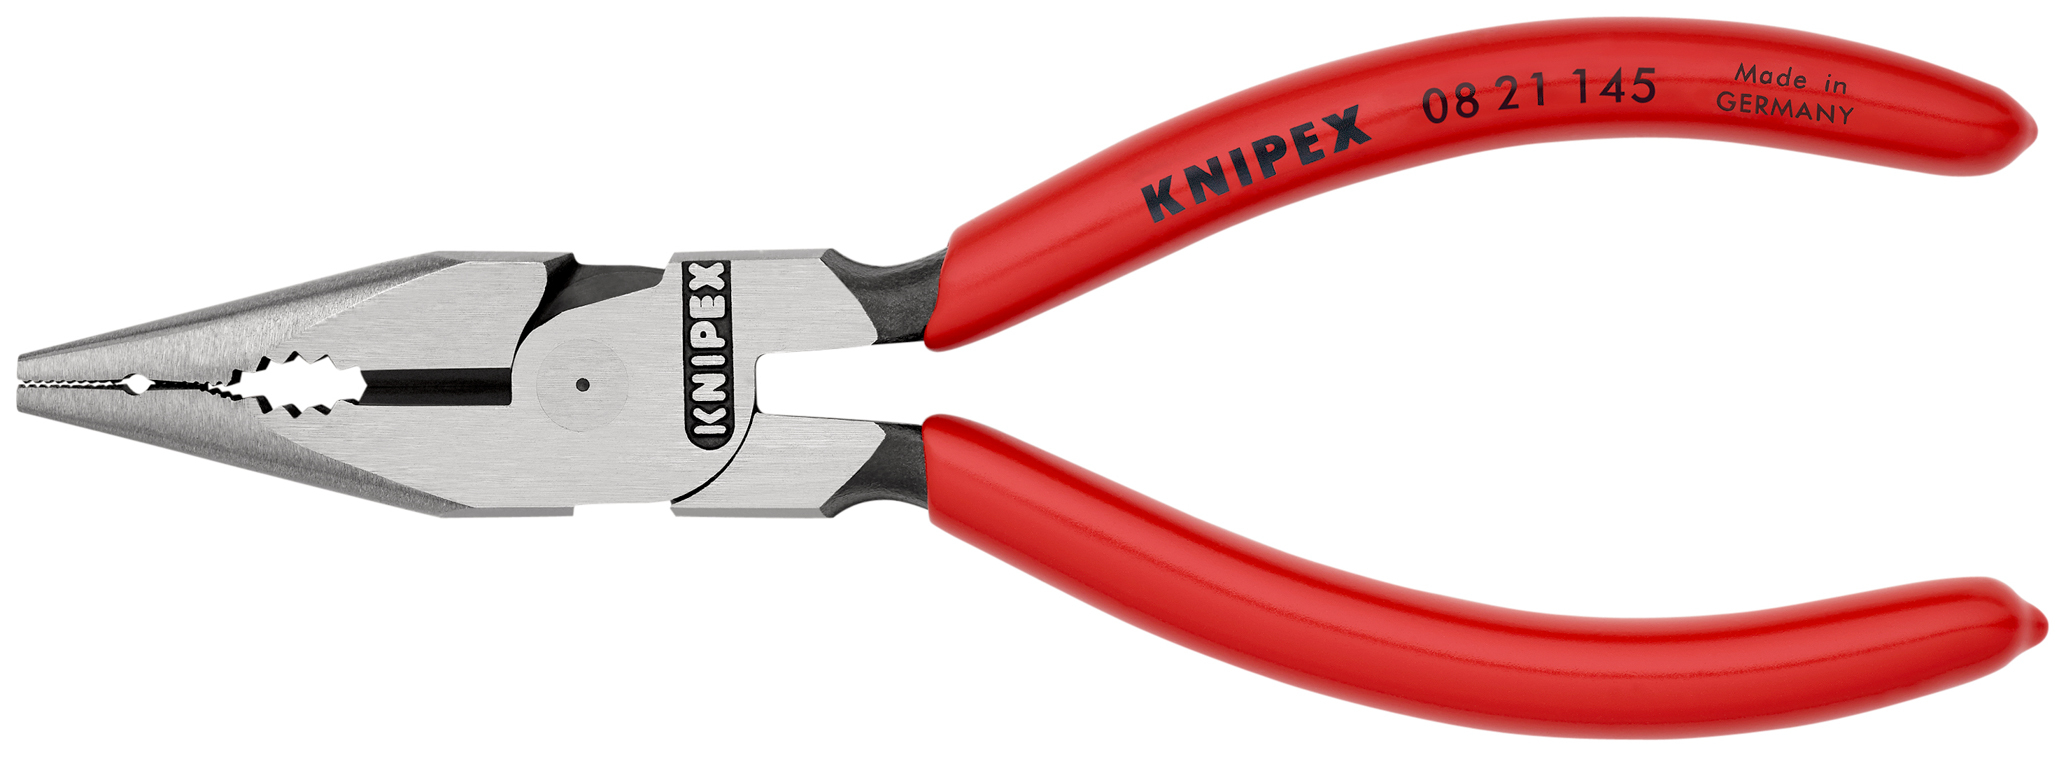 Pince universelle 1/2 ronde 145mm sb KNIPEX - 08 21 145 SB